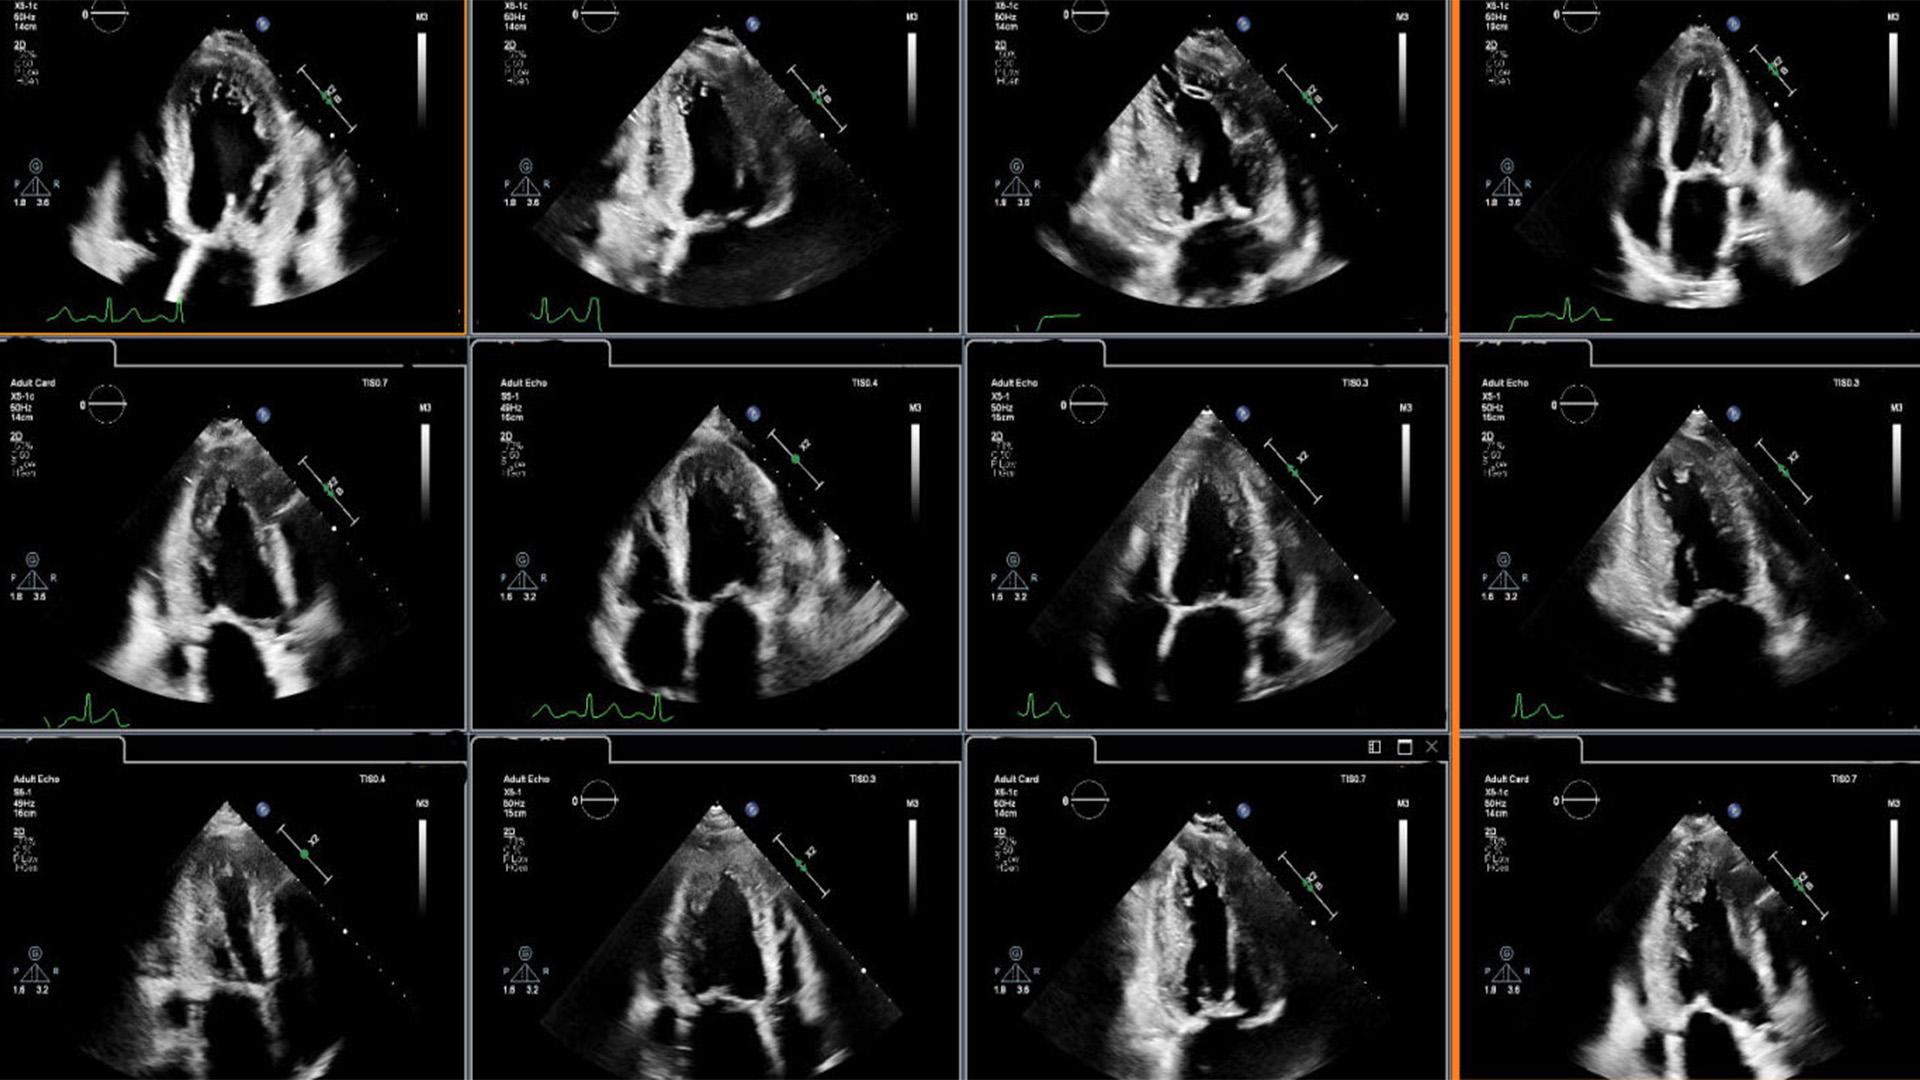 Clinical image showing cardiac ultrasound display for image analysis enhanced through integration of AI.